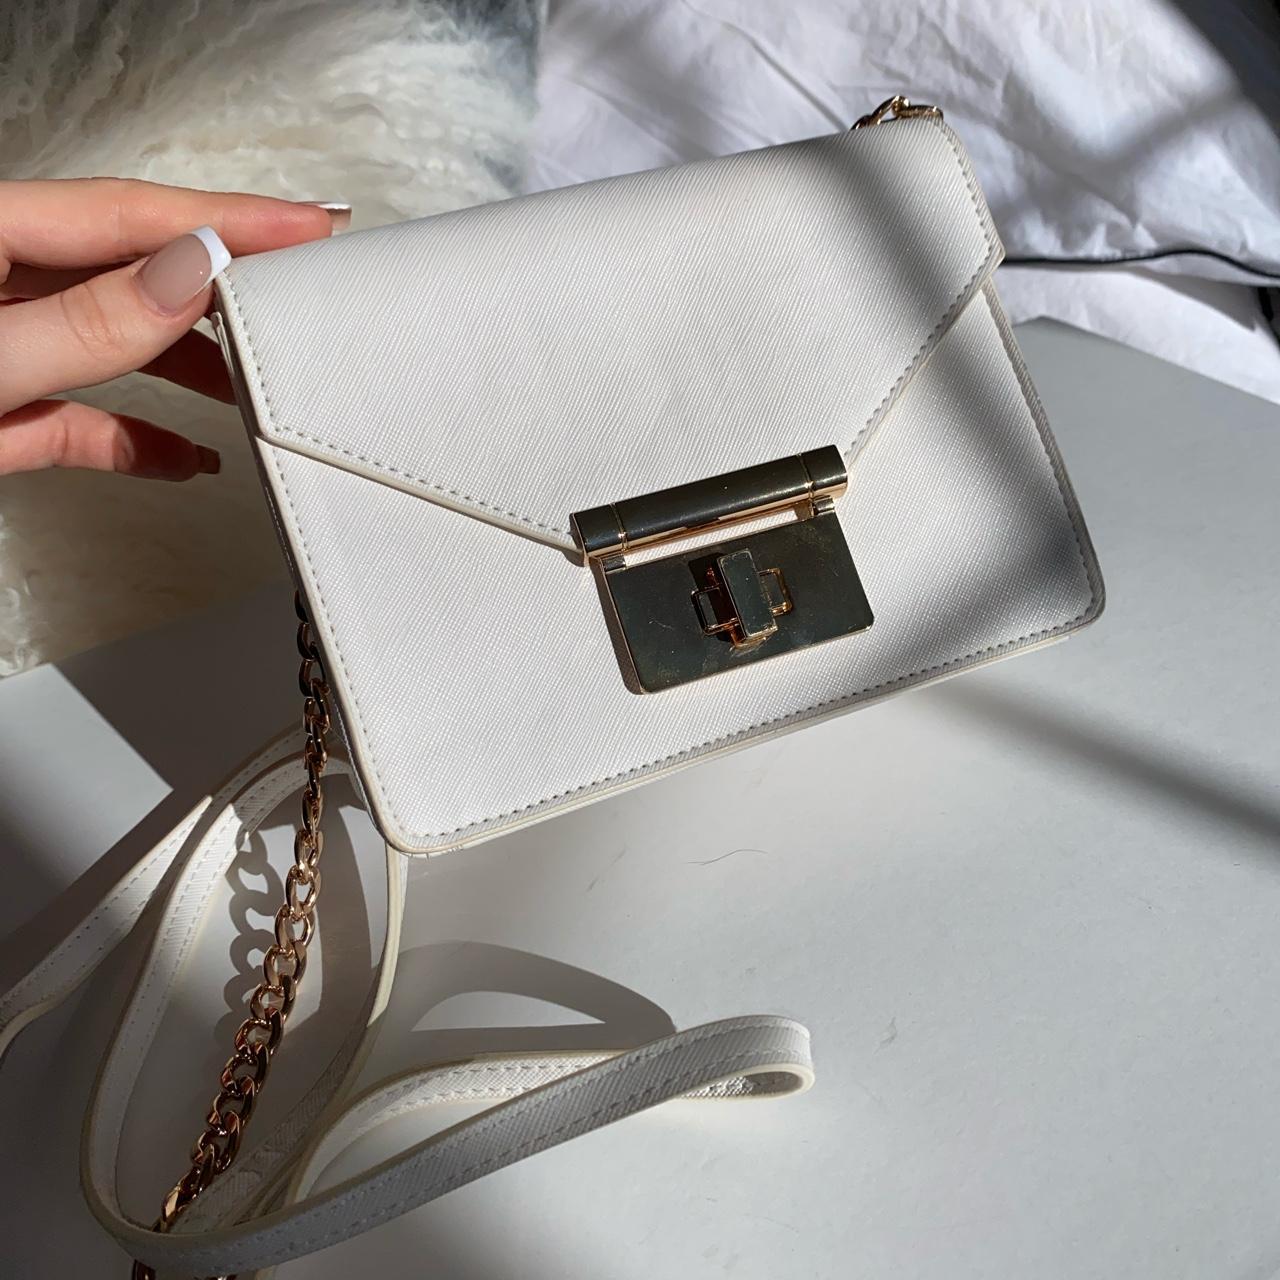 Beautiful white cross body bag with gold hardware.... - Depop